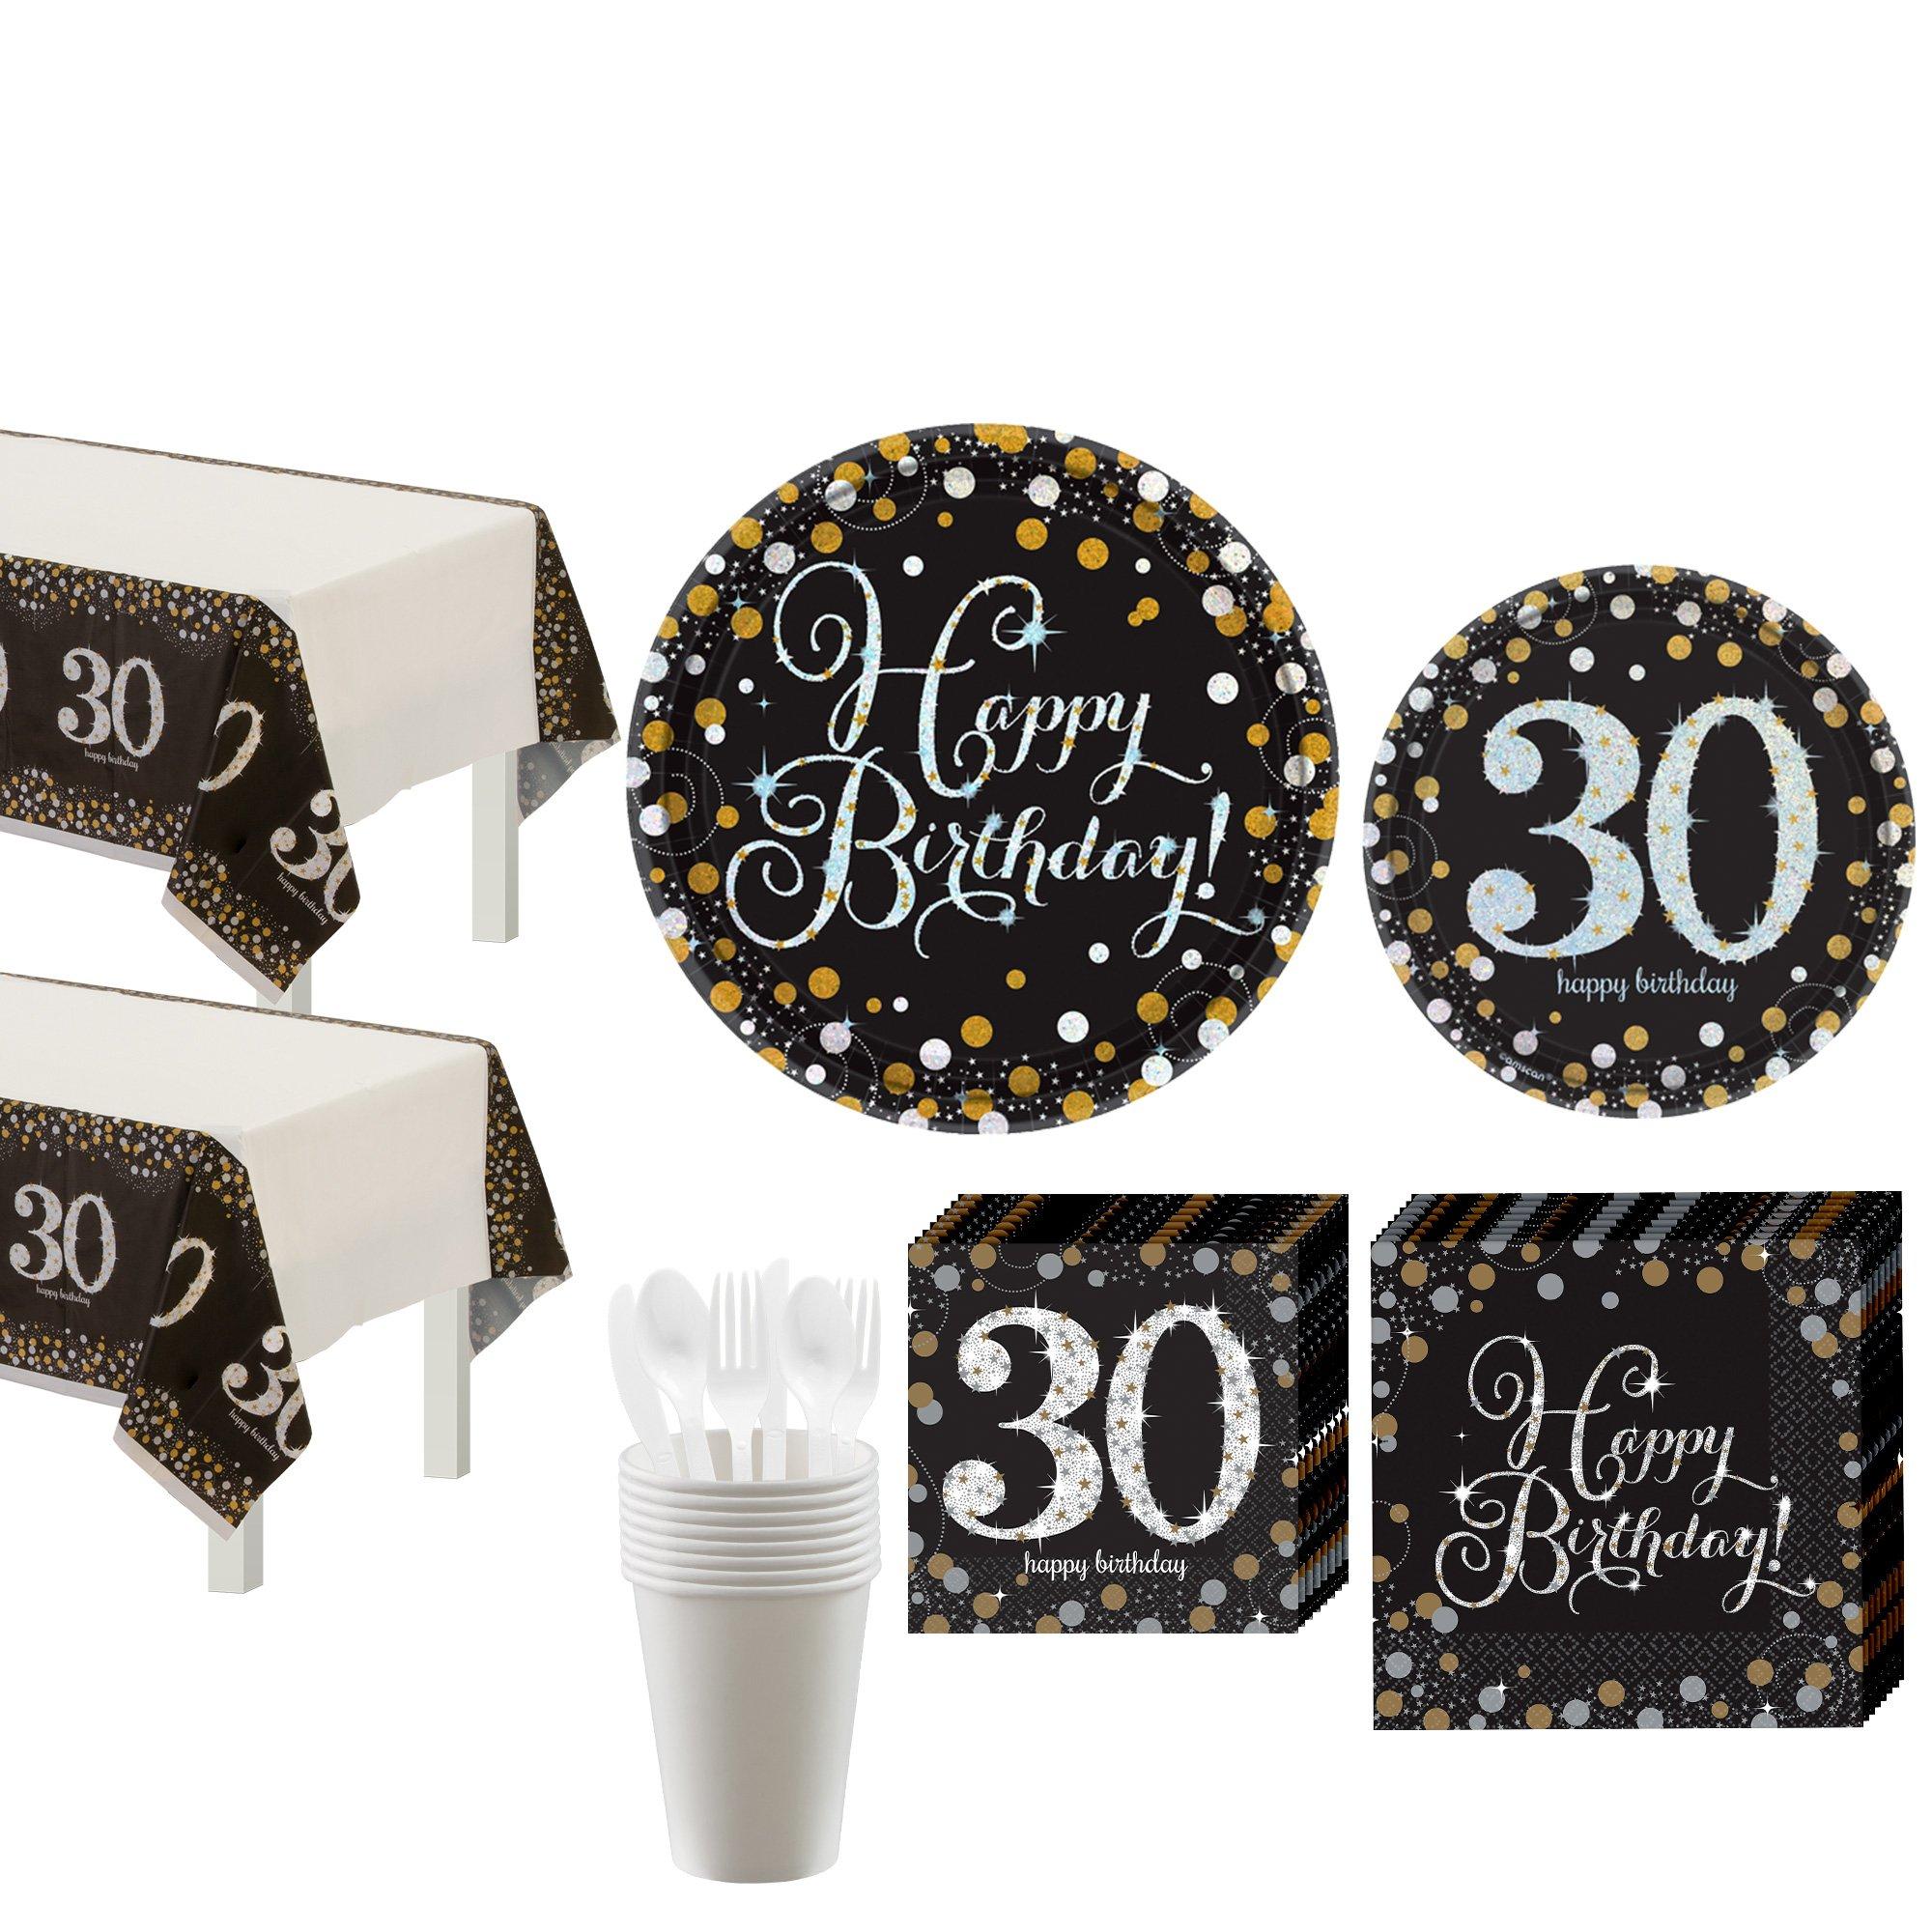 10 Pieces/lot) 30th Birthday Gift And Party Decoration Favors Of